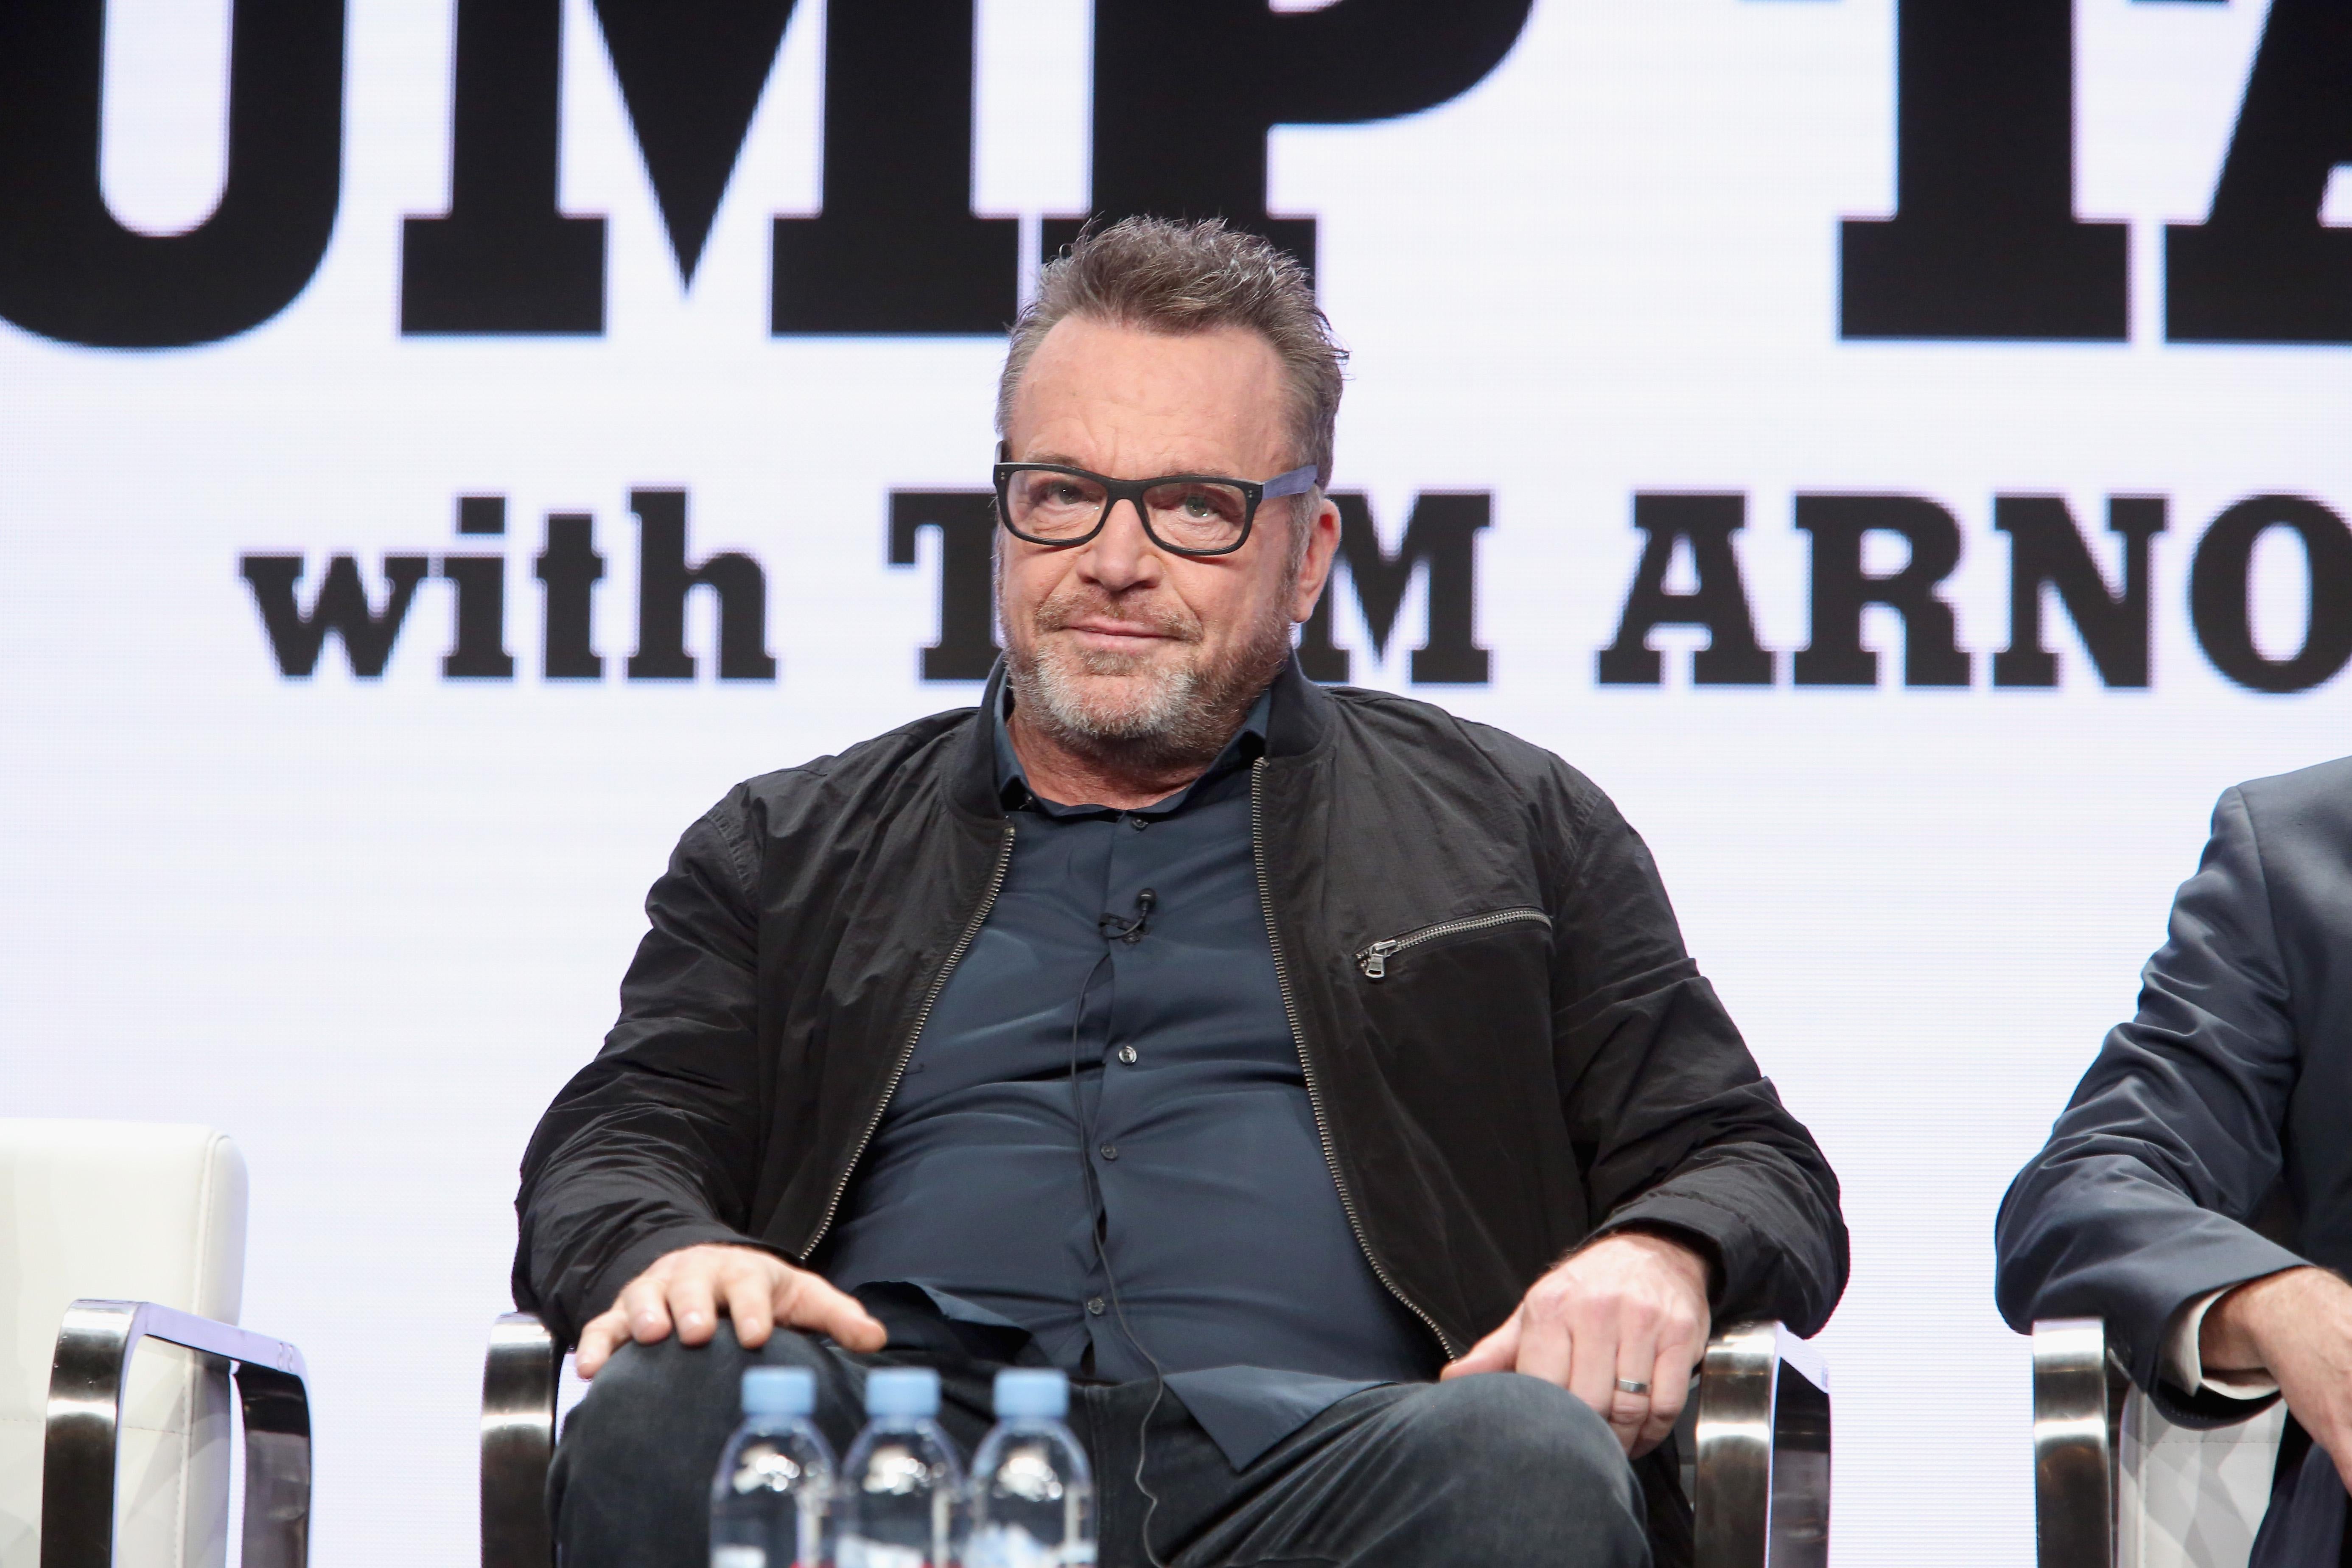 Tom Arnold sits at a panel on a black chair, wearing black-rimmed glasses and a black jacket